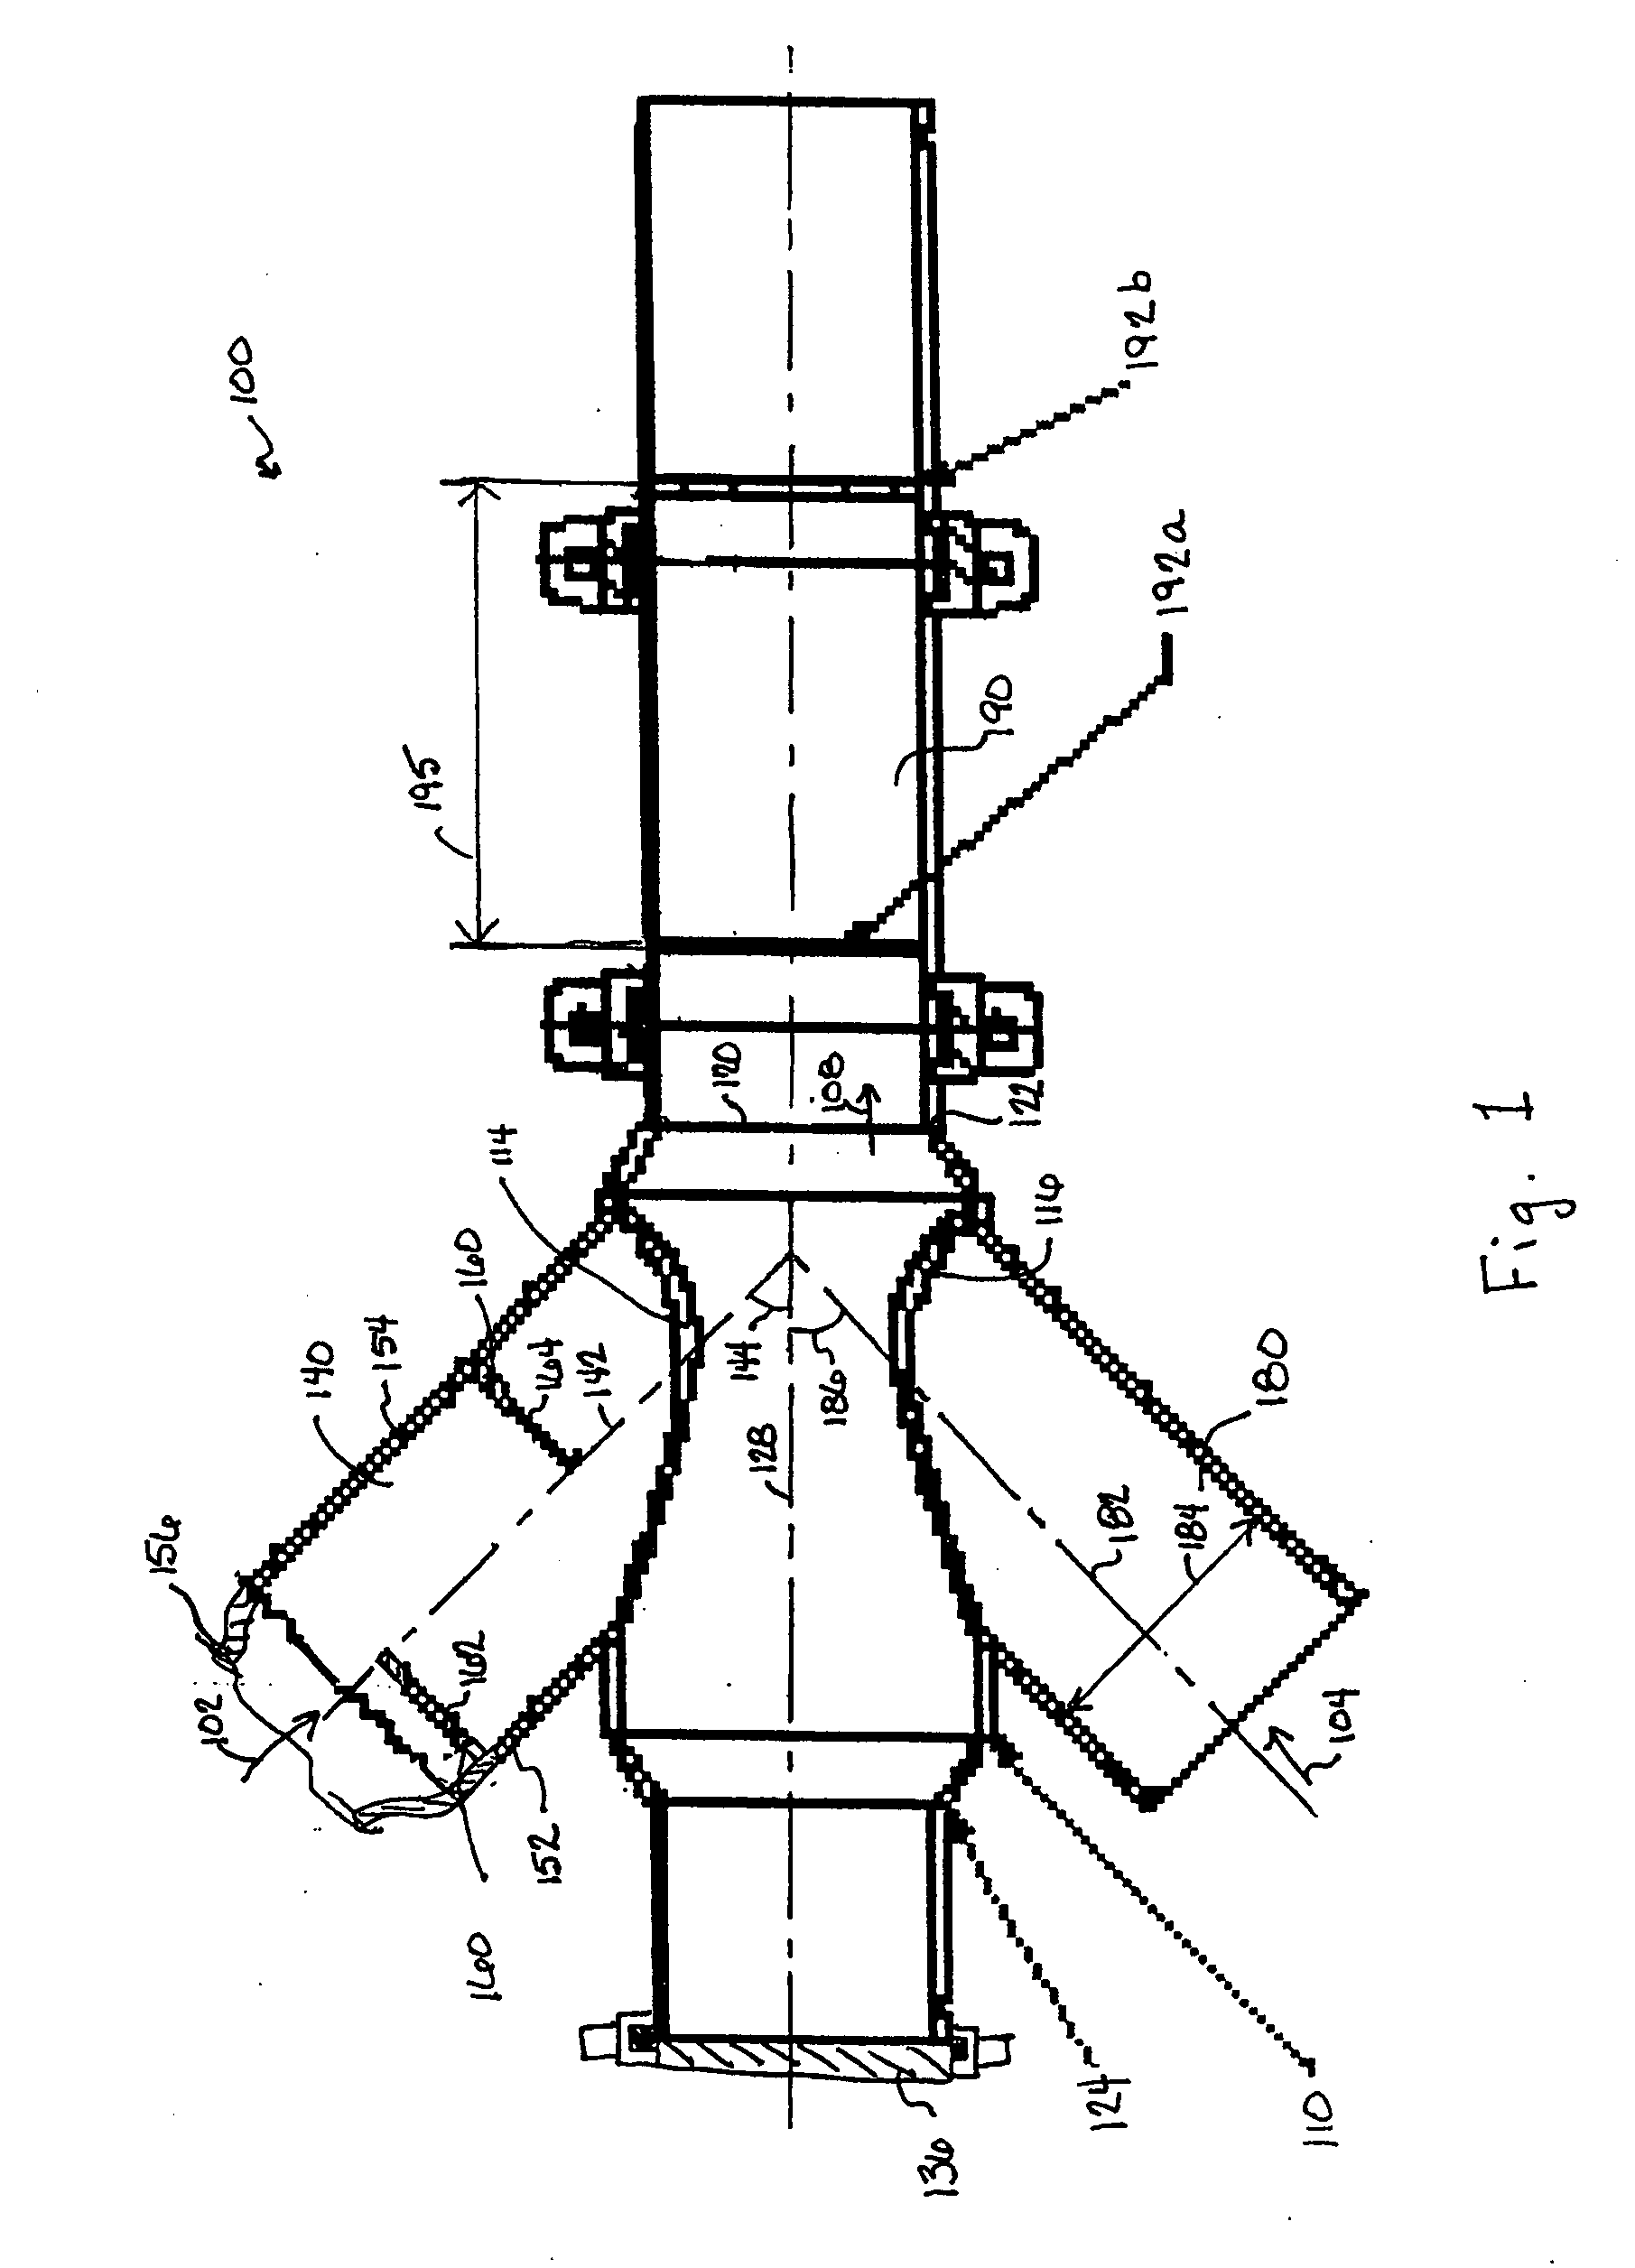 Apparatus and method for homogenizing two or more fluids of different densities